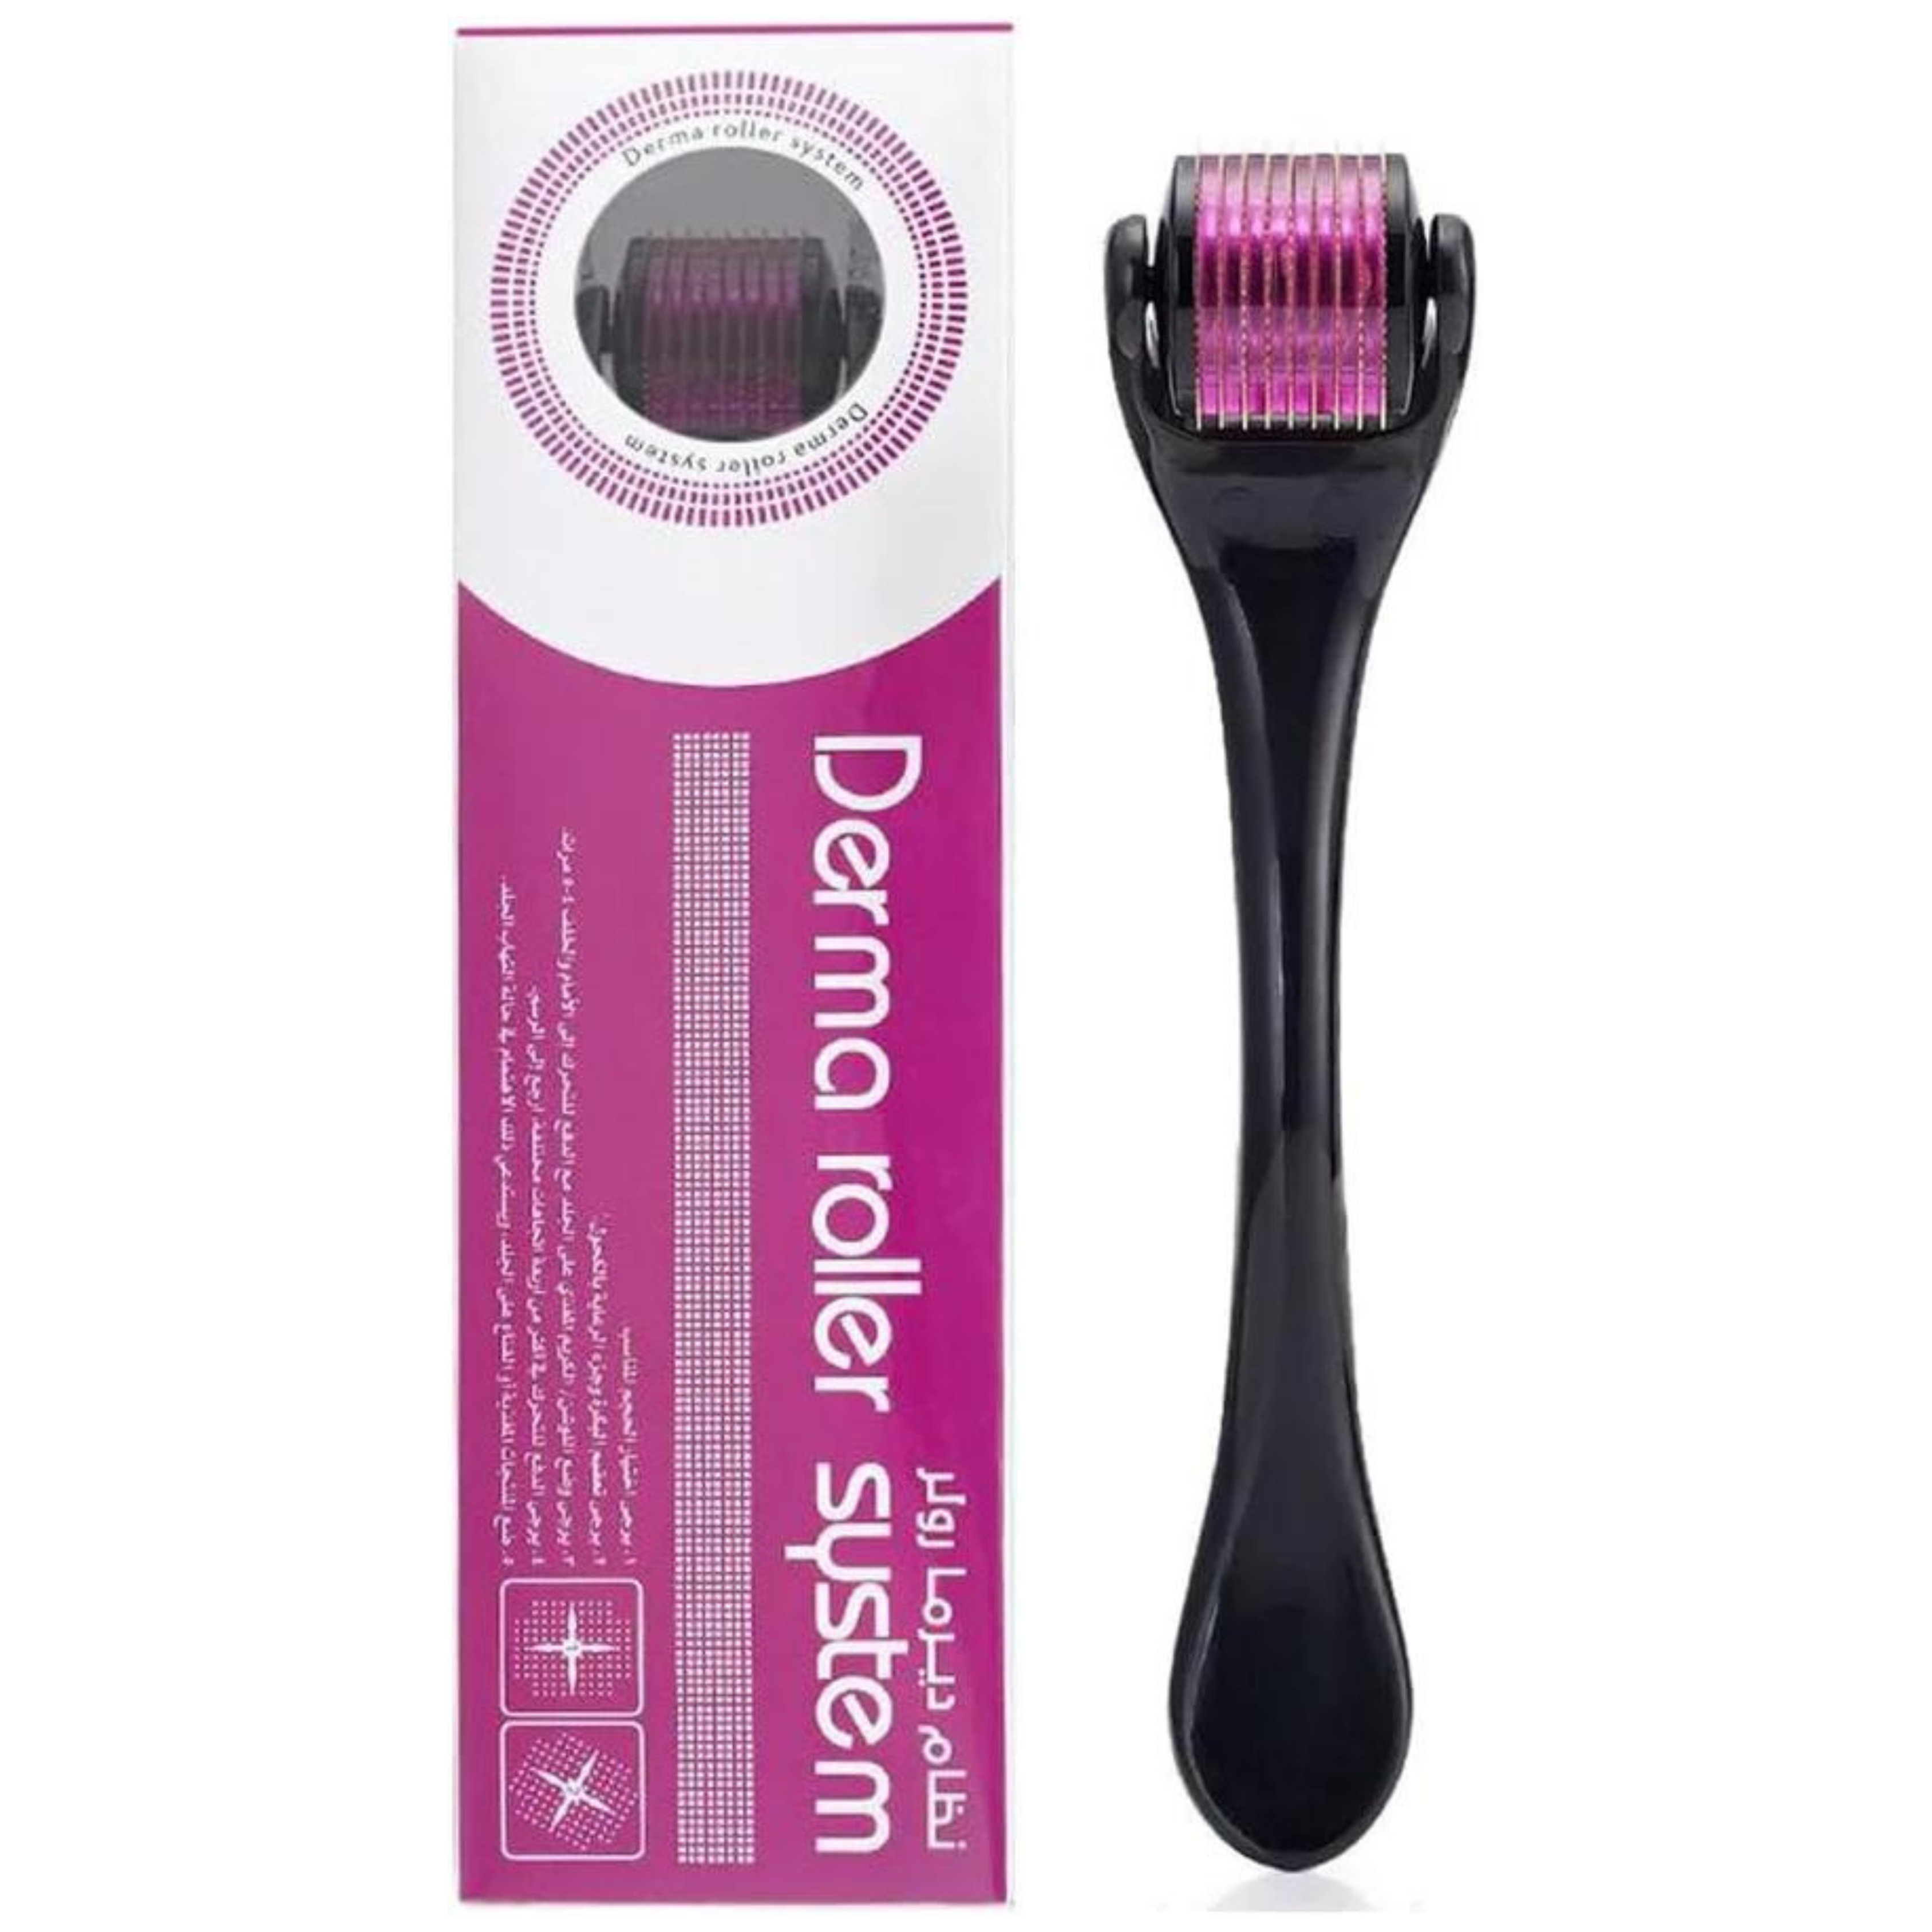 Dermaoler 540 1.00mm Needle Your Best Choice for Acne Treatment of Acne, Pigmentation, Stretch Marks and Head and Beard Regrowth